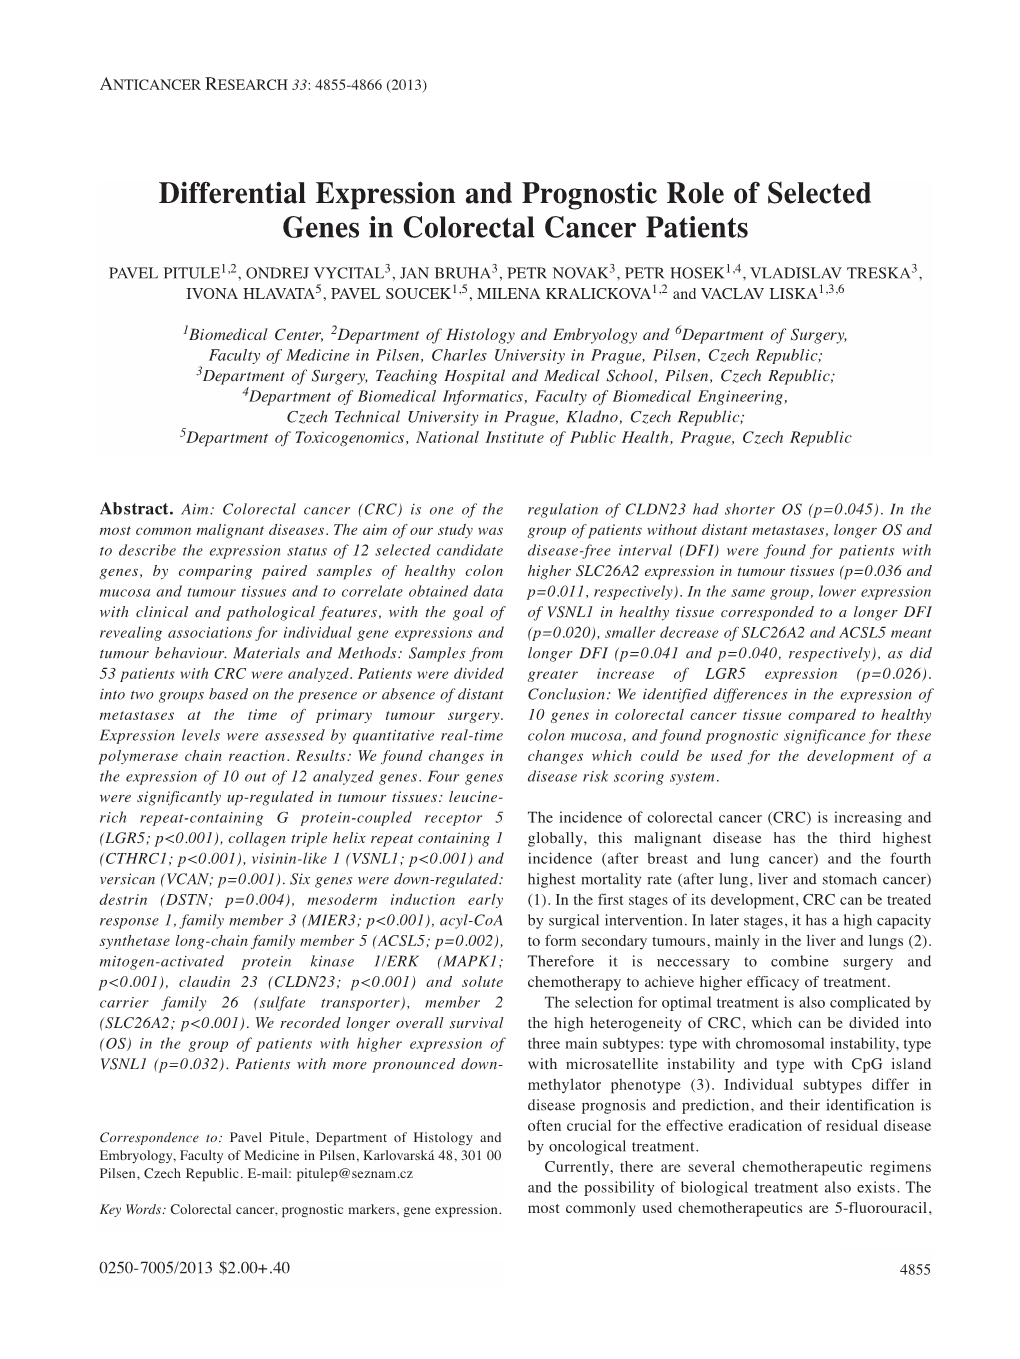 Differential Expression and Prognostic Role of Selected Genes in Colorectal Cancer Patients